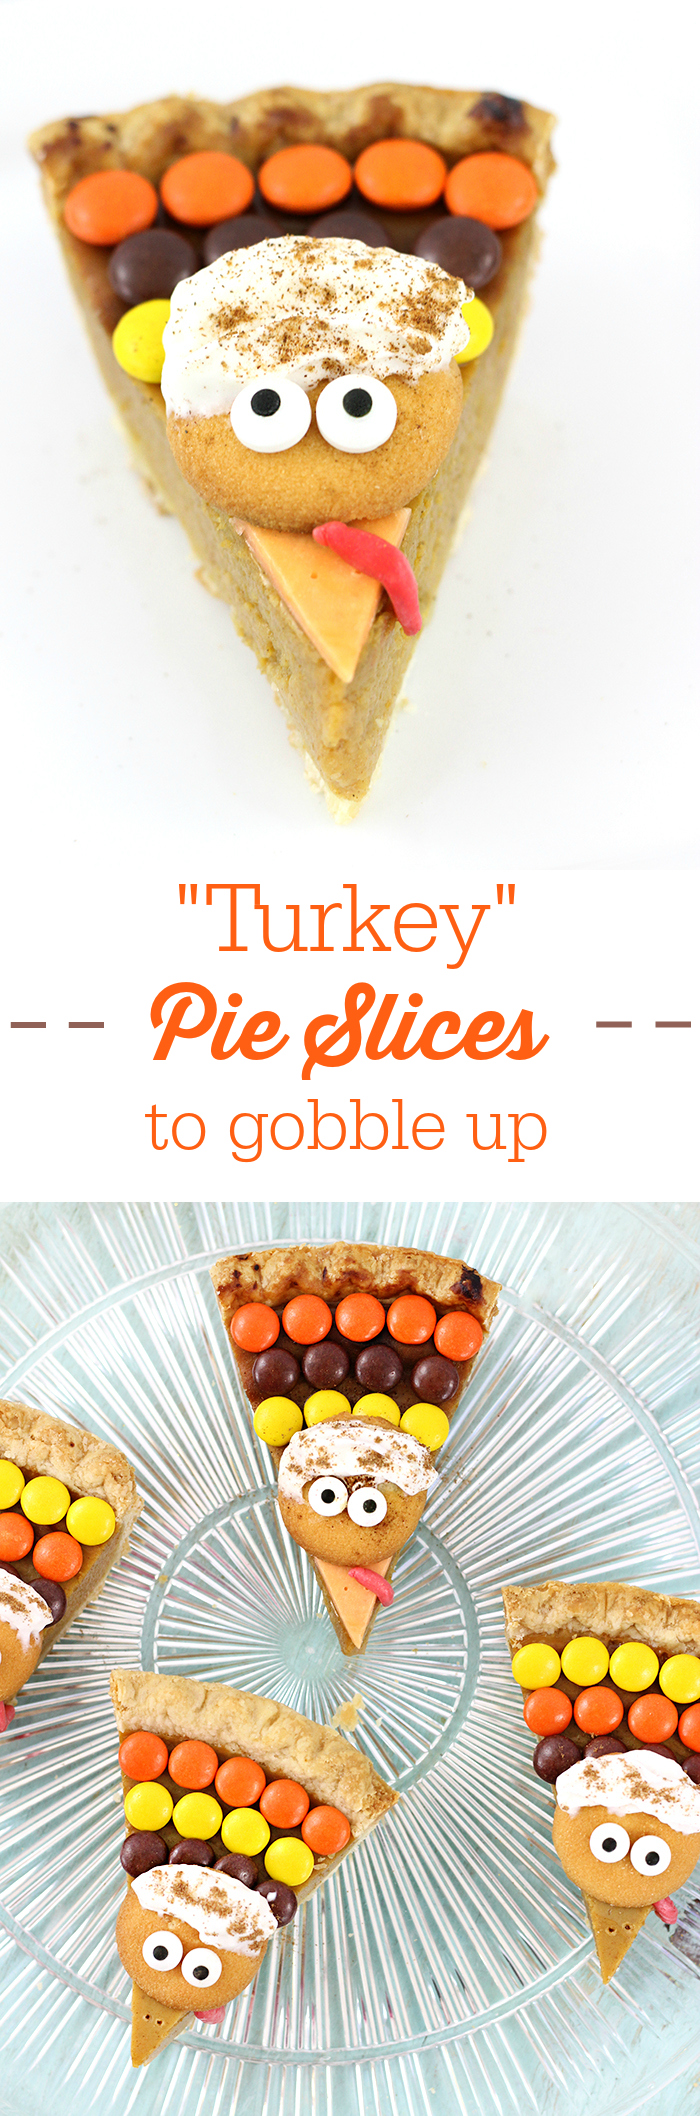 cute turkey pie slices to gobble up